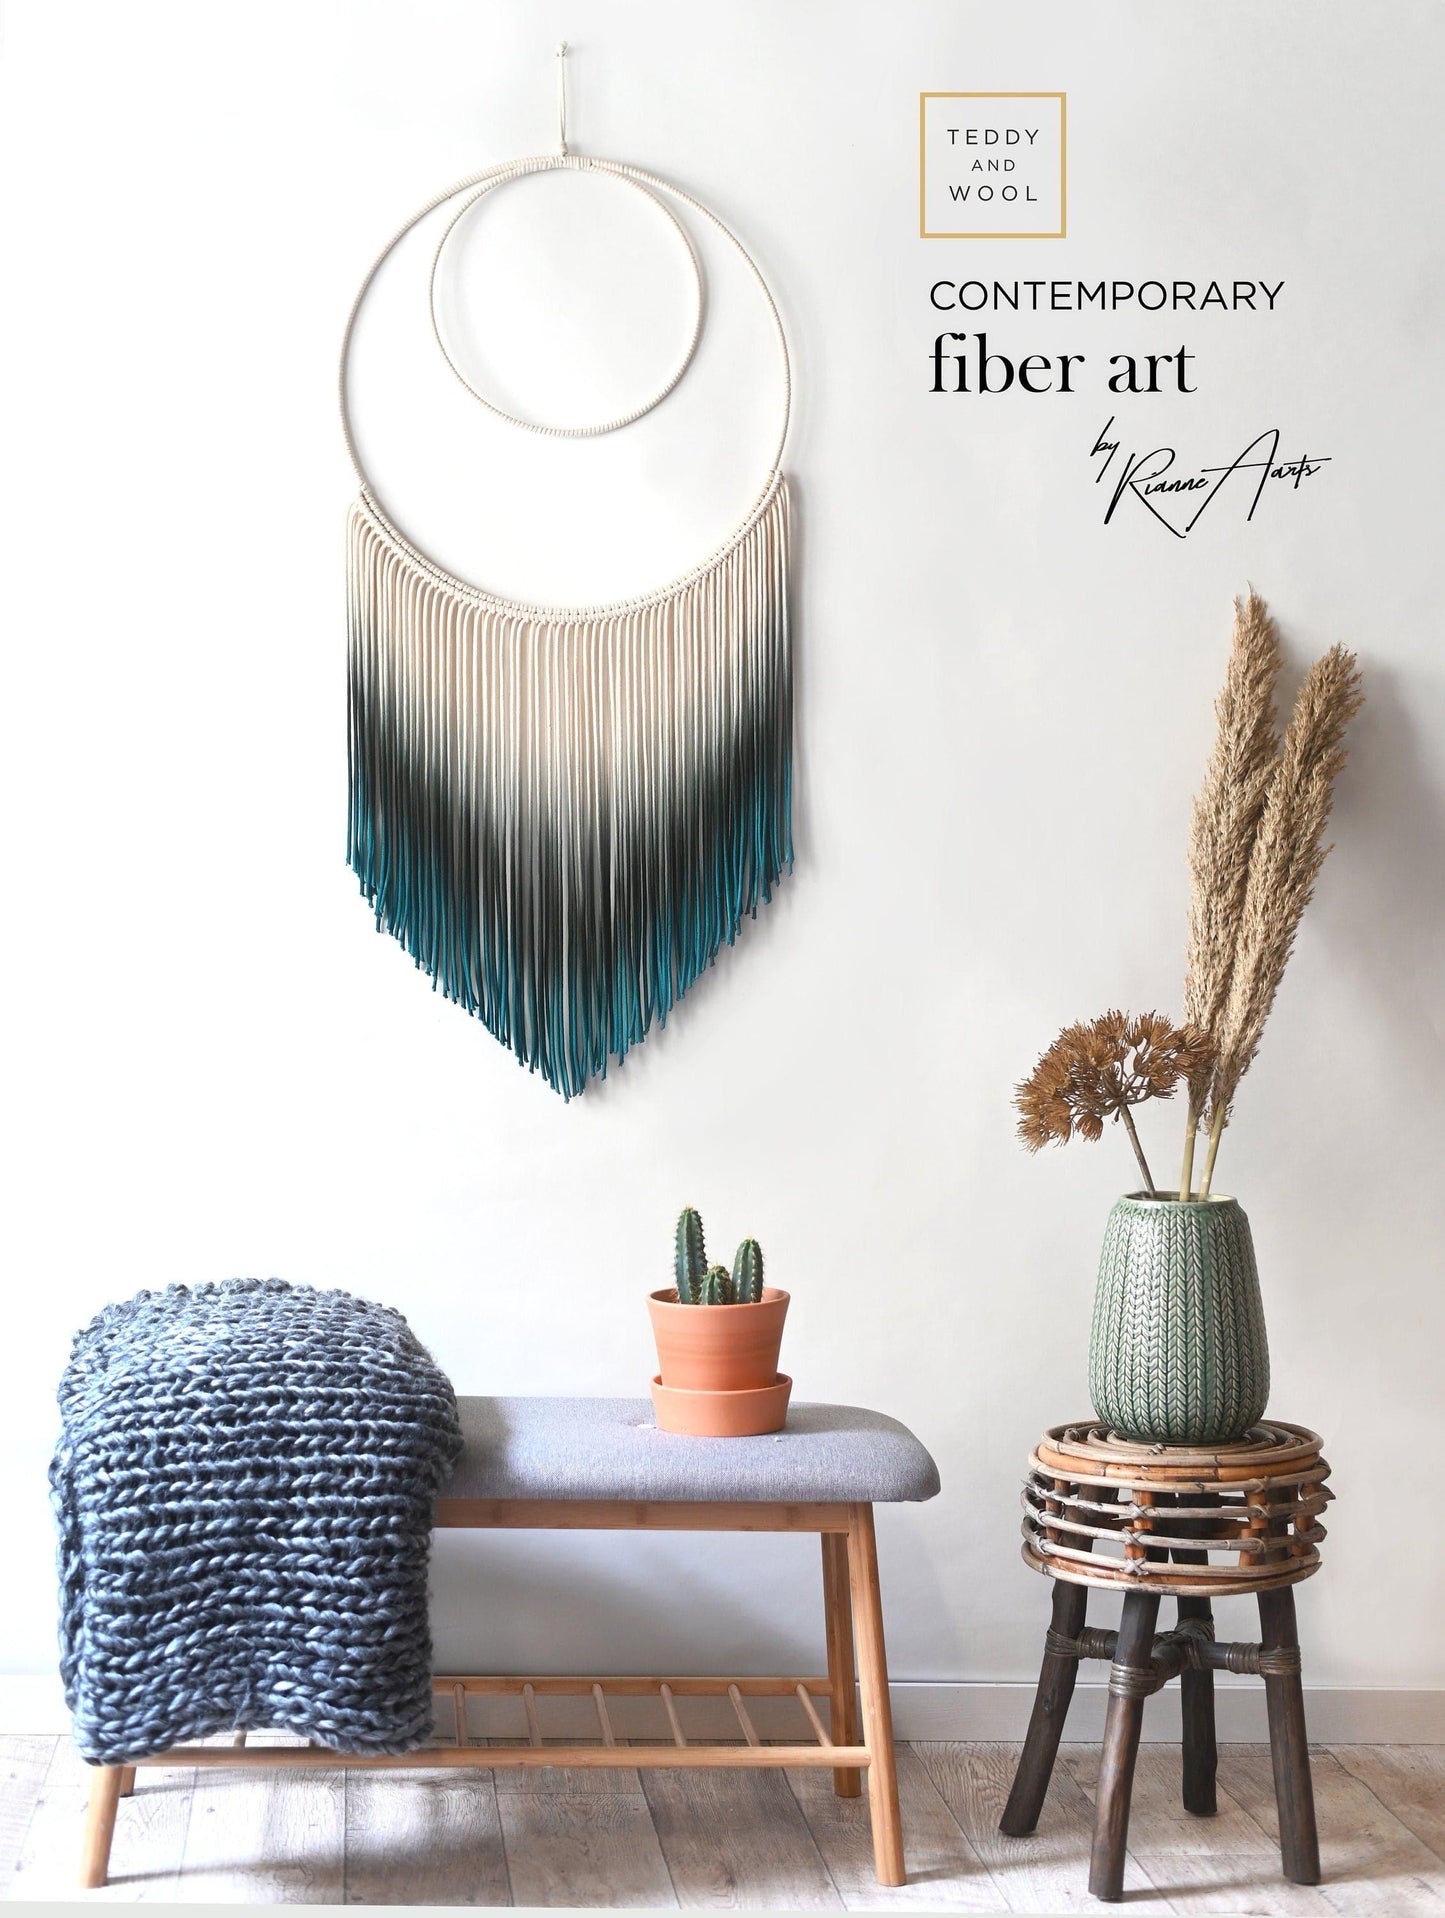 Vera Macrame Wall Hanging - Dip dyed Dreamcatcher - MAIA HOMES